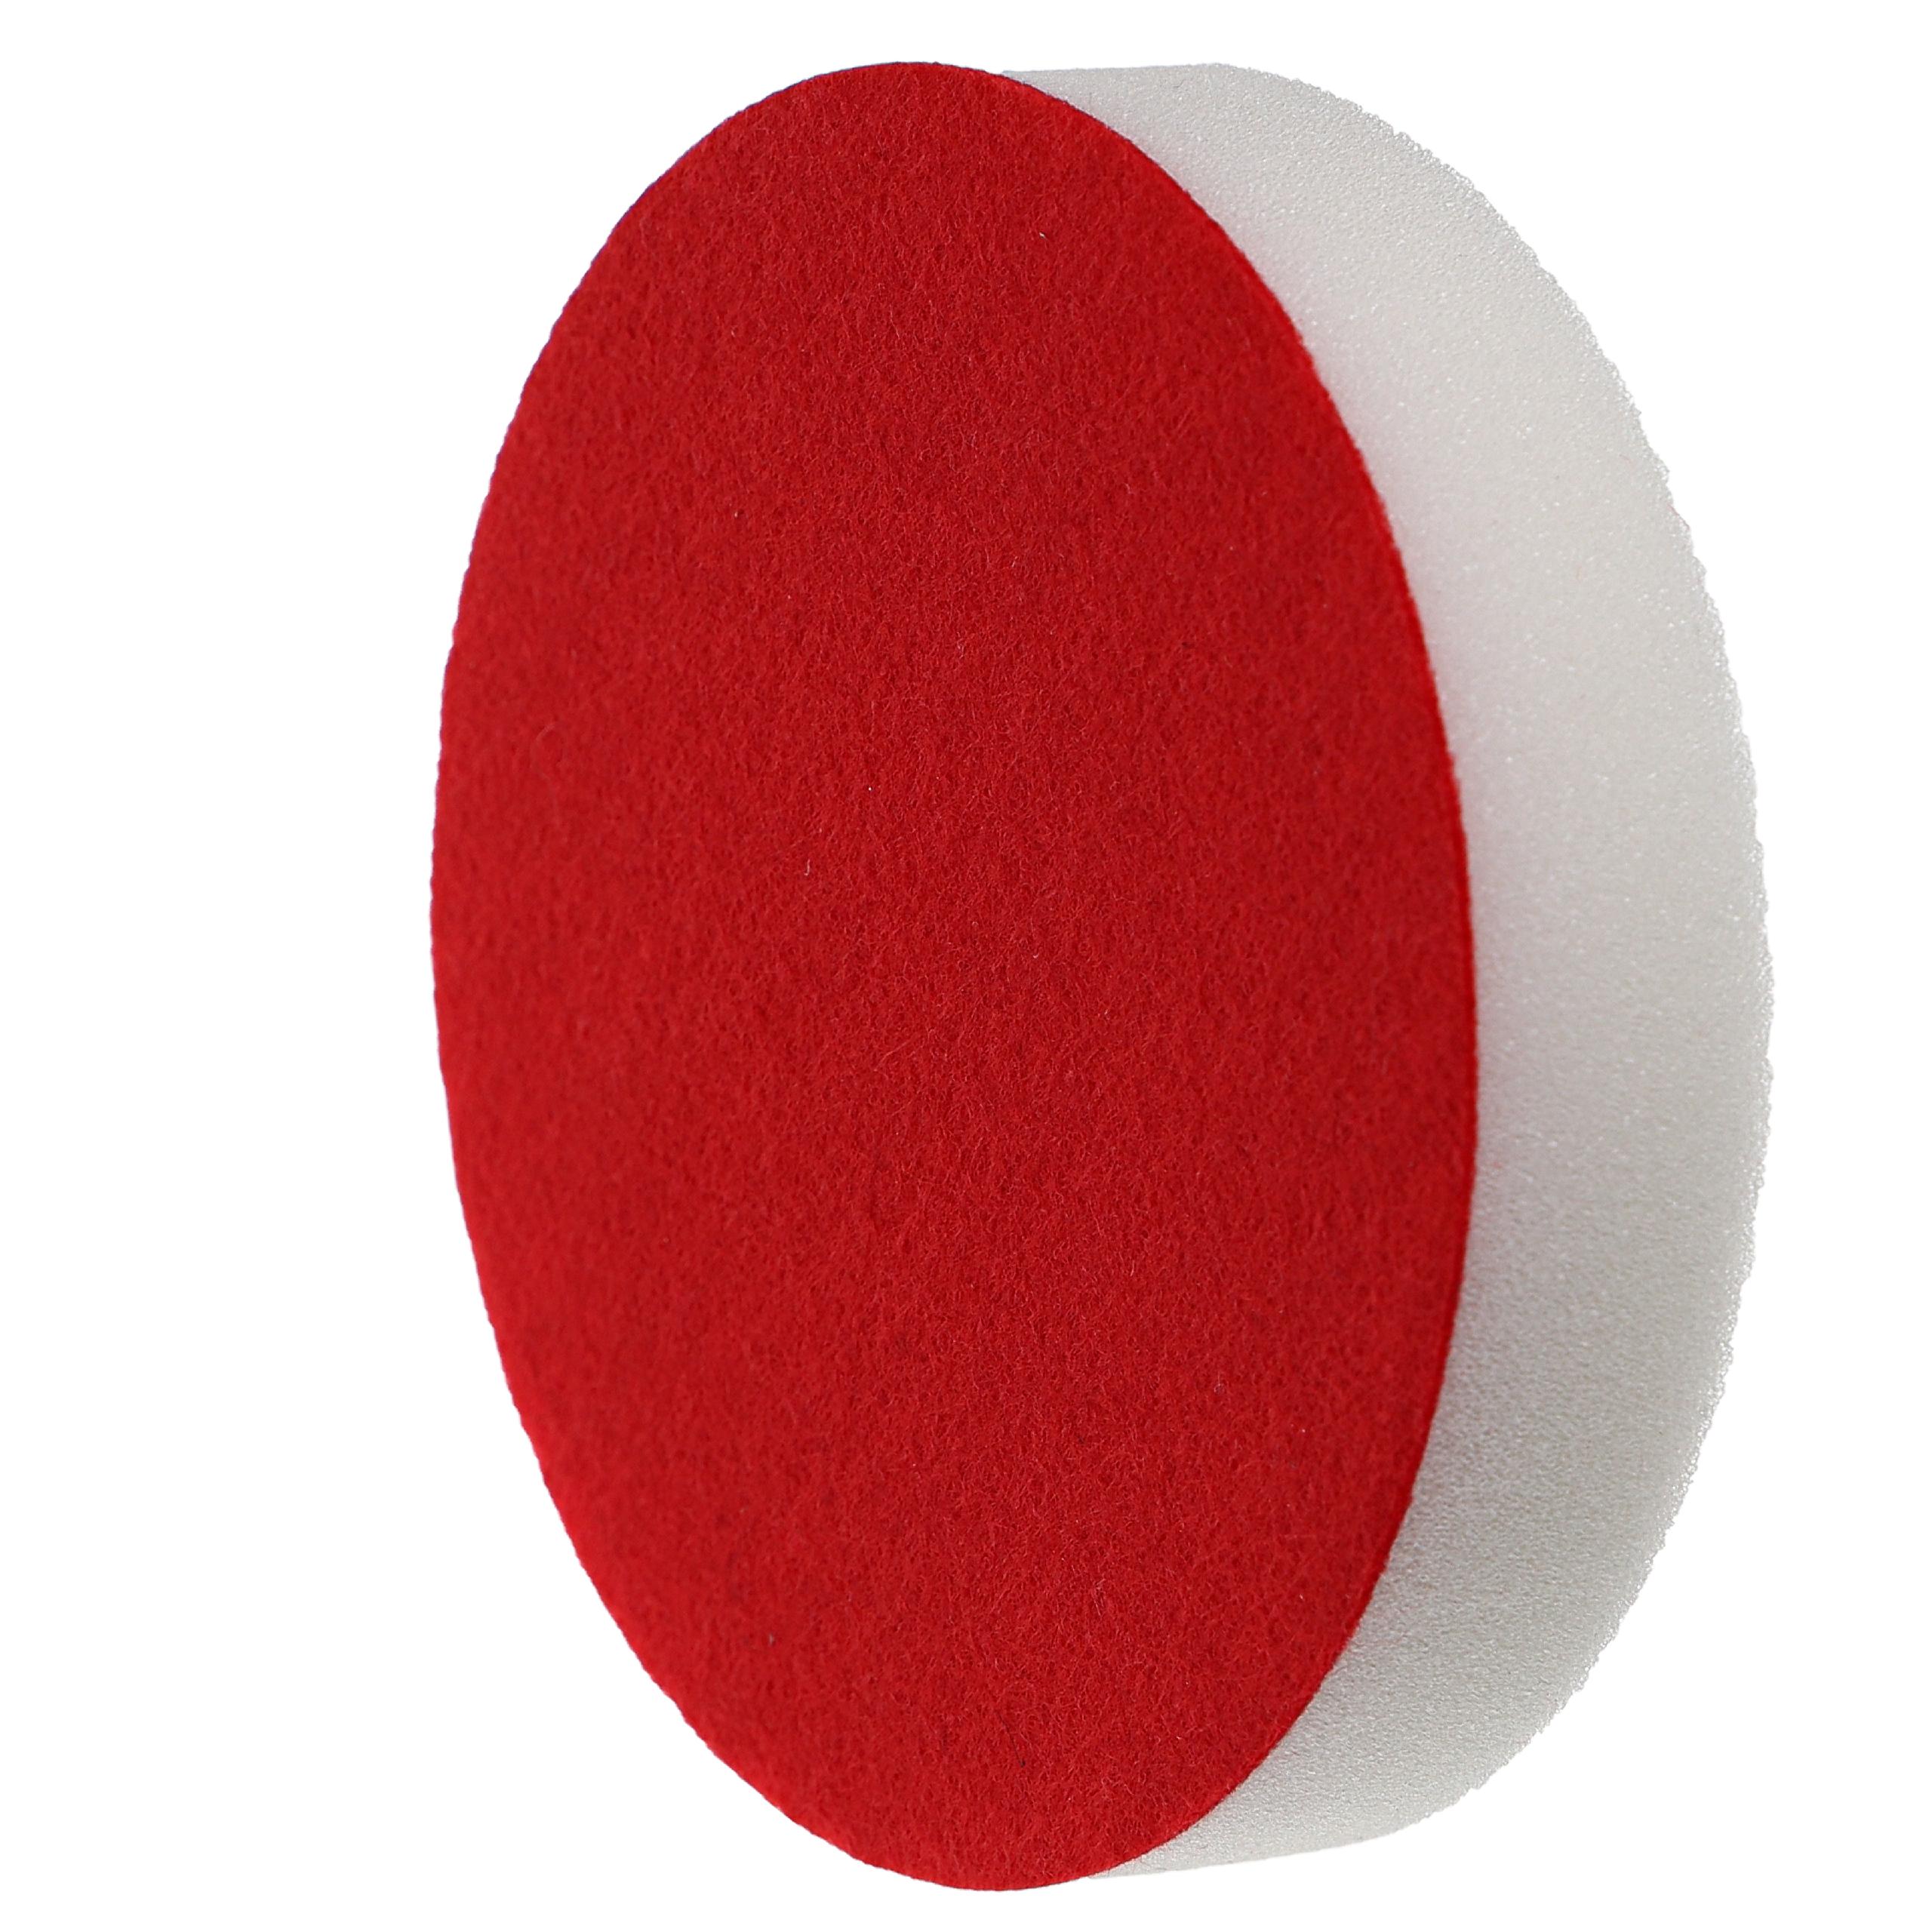 Polishing Pad as Replacement for Bosch 2608613005, 3165140014854 for Polishing Machines - 13 cm Diameter, 14 g